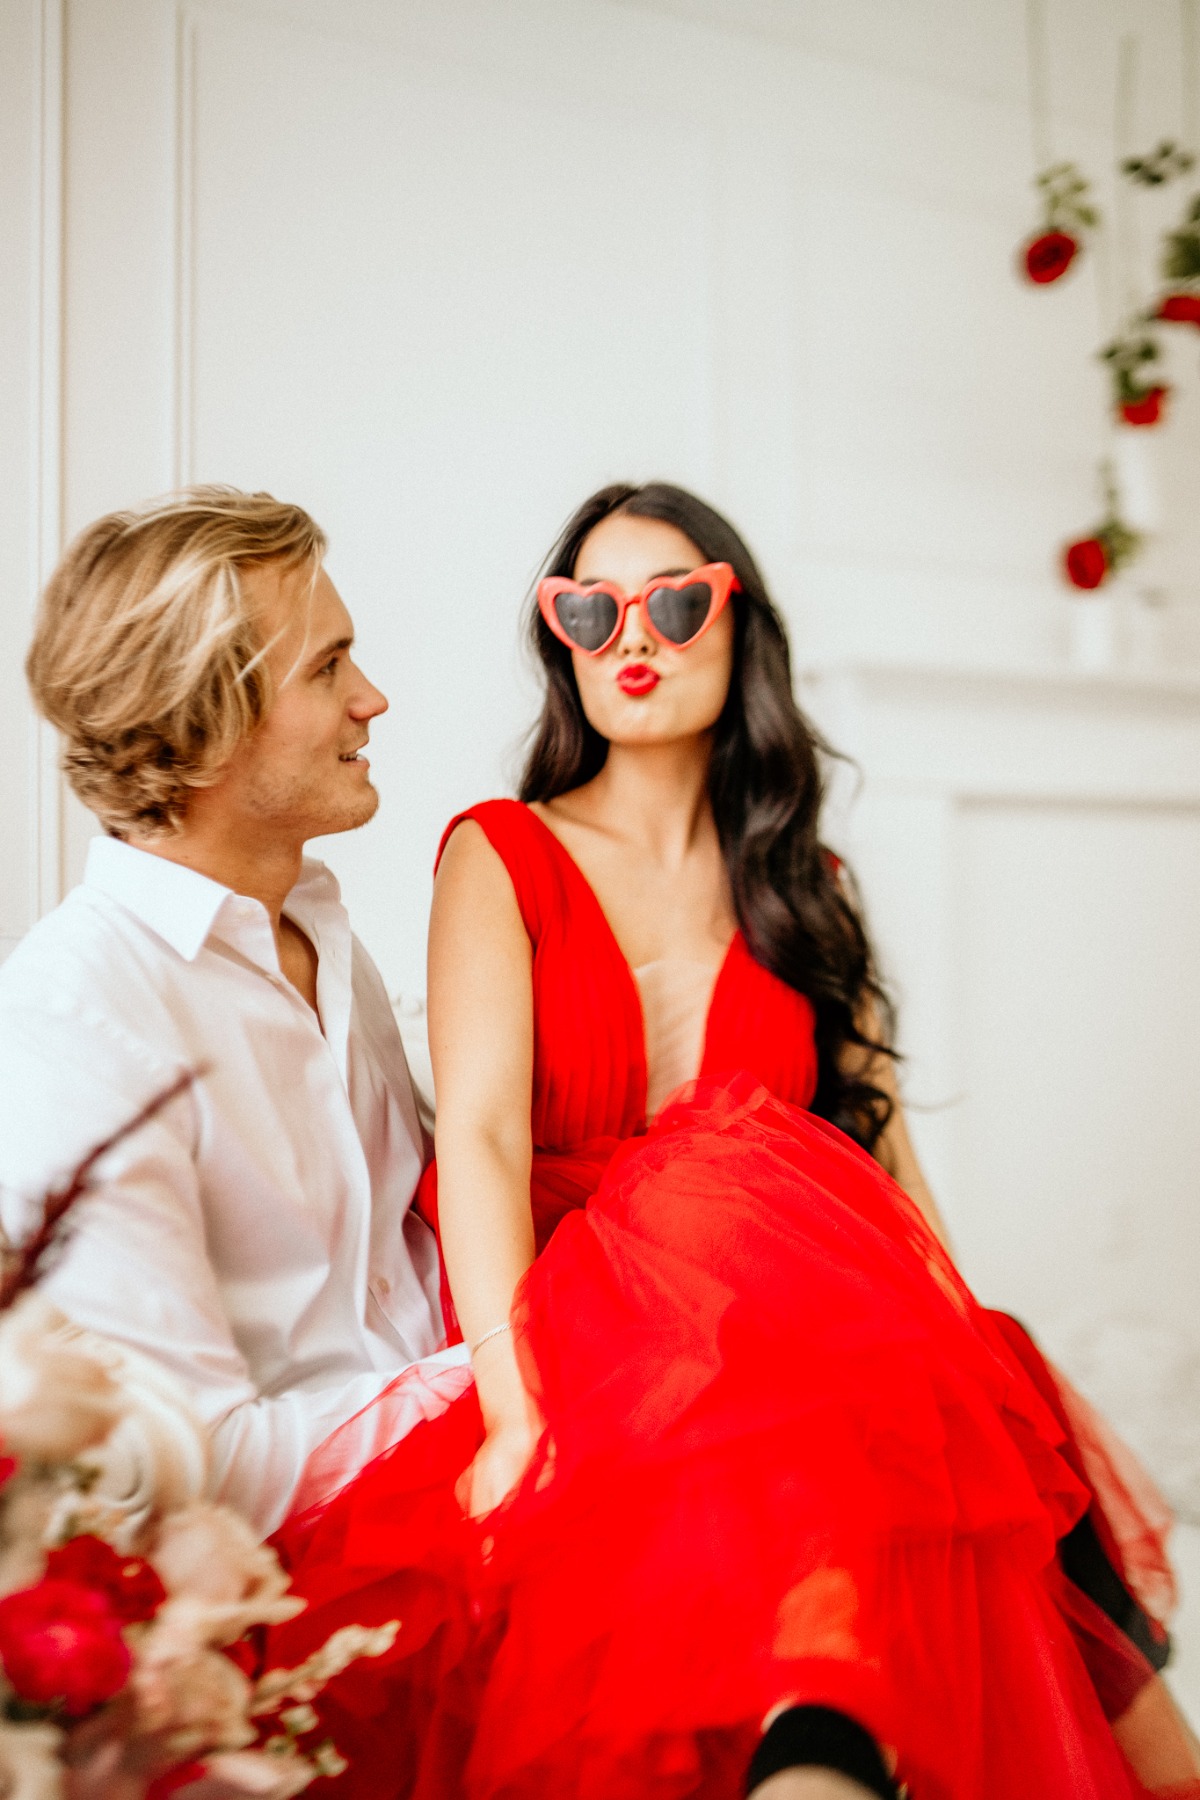 Why A Valentine's Day Couple Shoot Should Be In Your Future